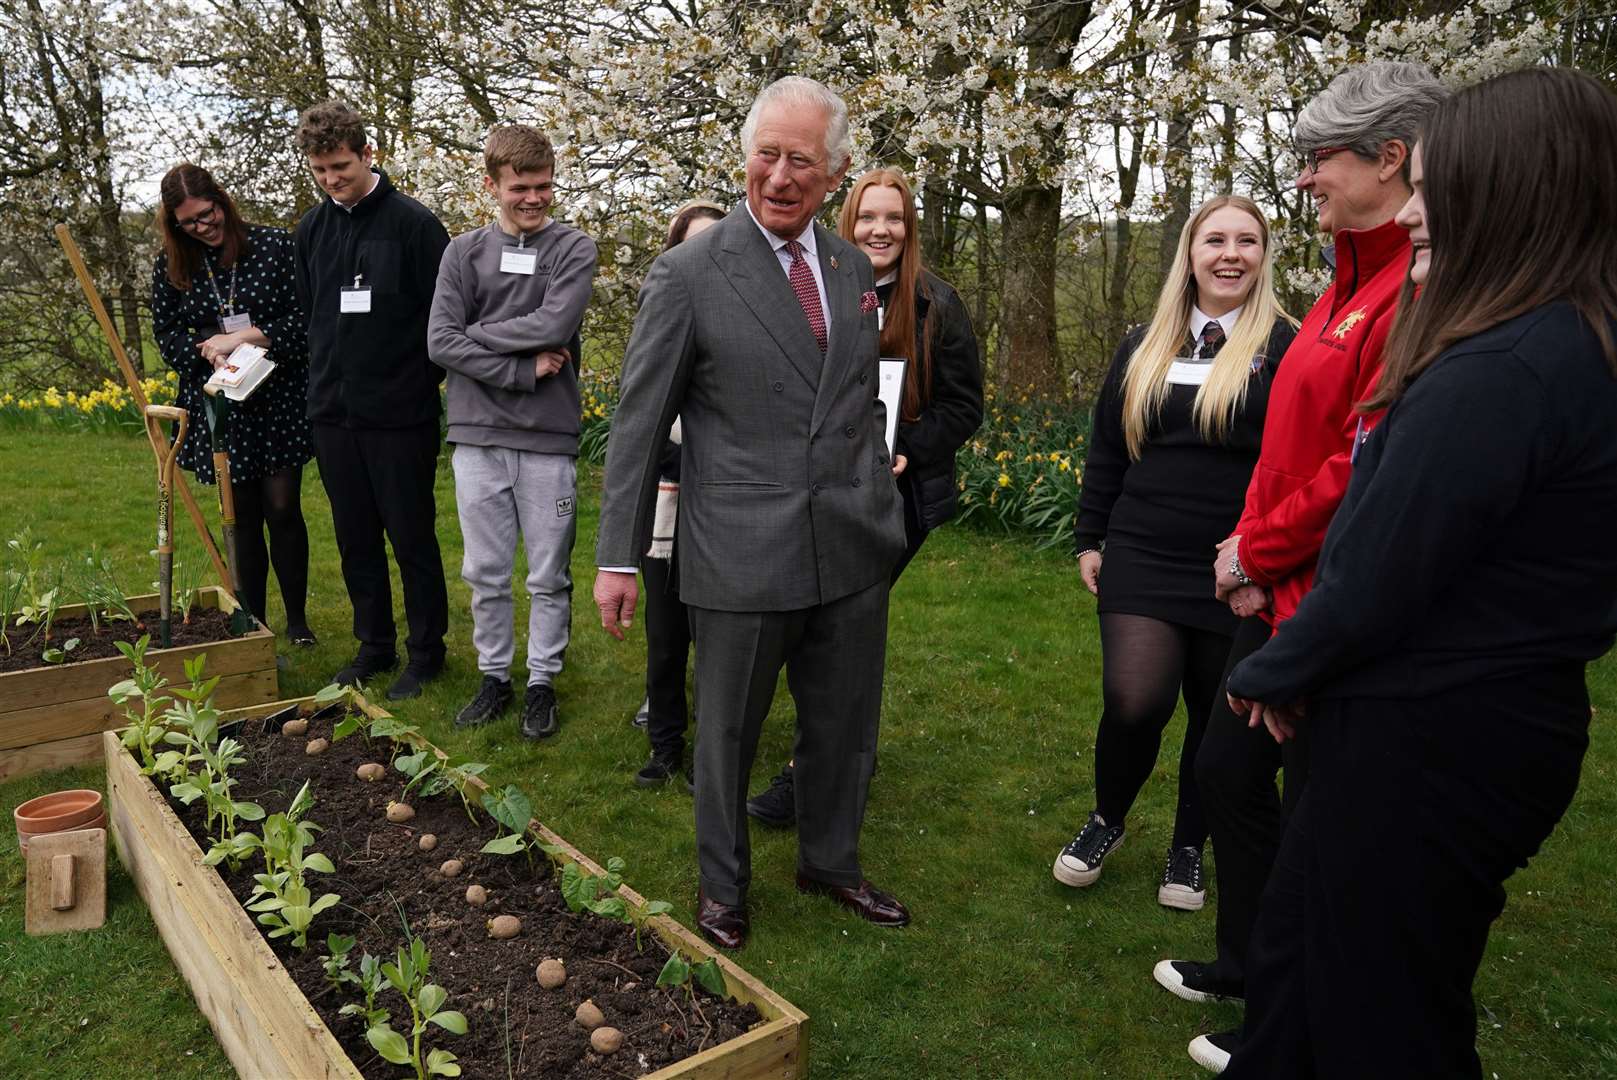 Charles meeting children from Robert Burns Academy, winners of the food waste solution challenge, as part of the Food For The Future education programme (Andrew Milligan/PA)